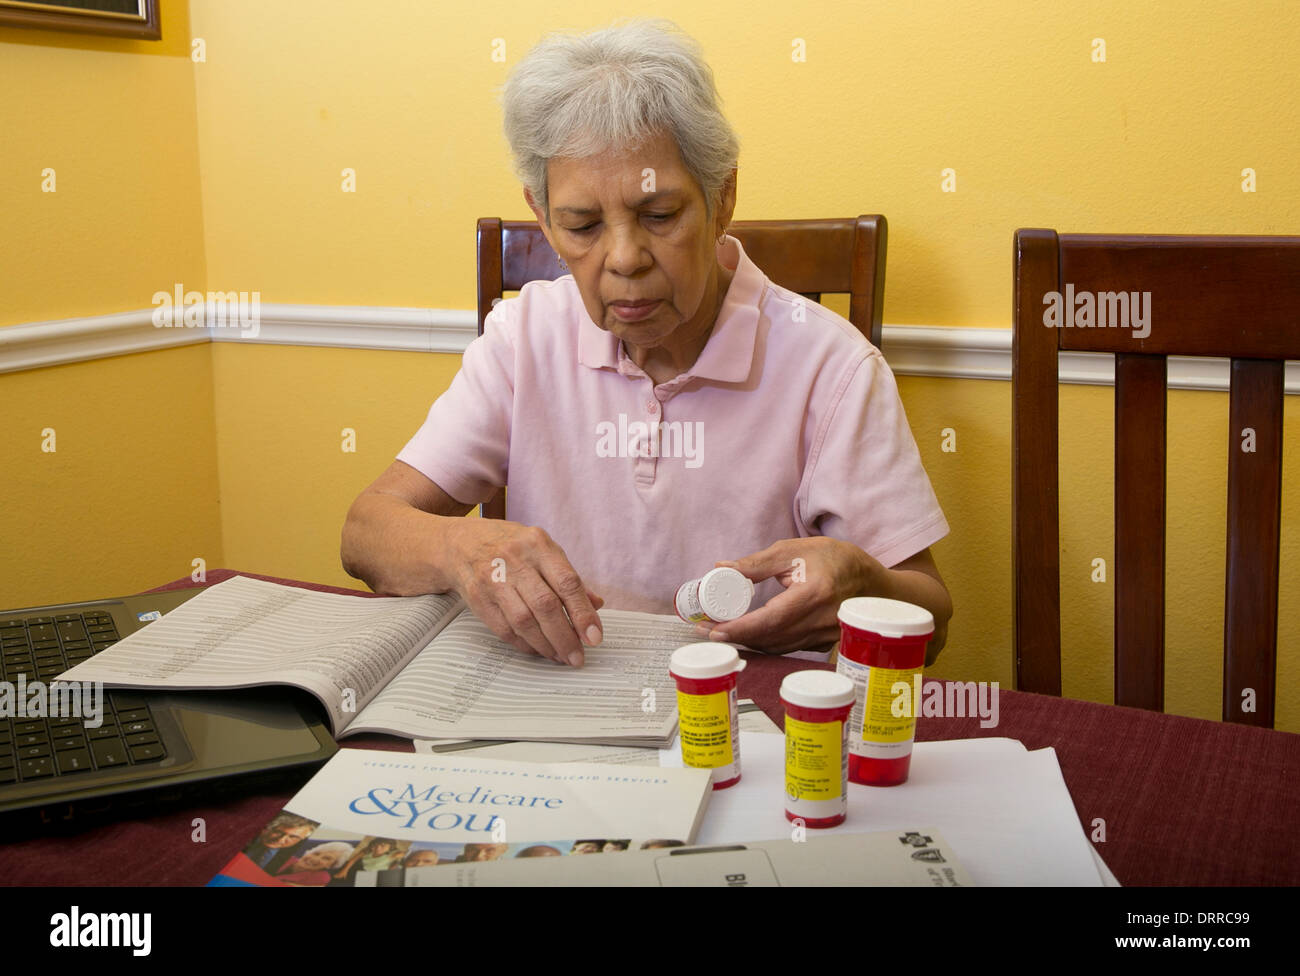 Hispanic 75 year old senior citizen woman reads Medicare booklet pamphlet and looks up her prescription medications Stock Photo